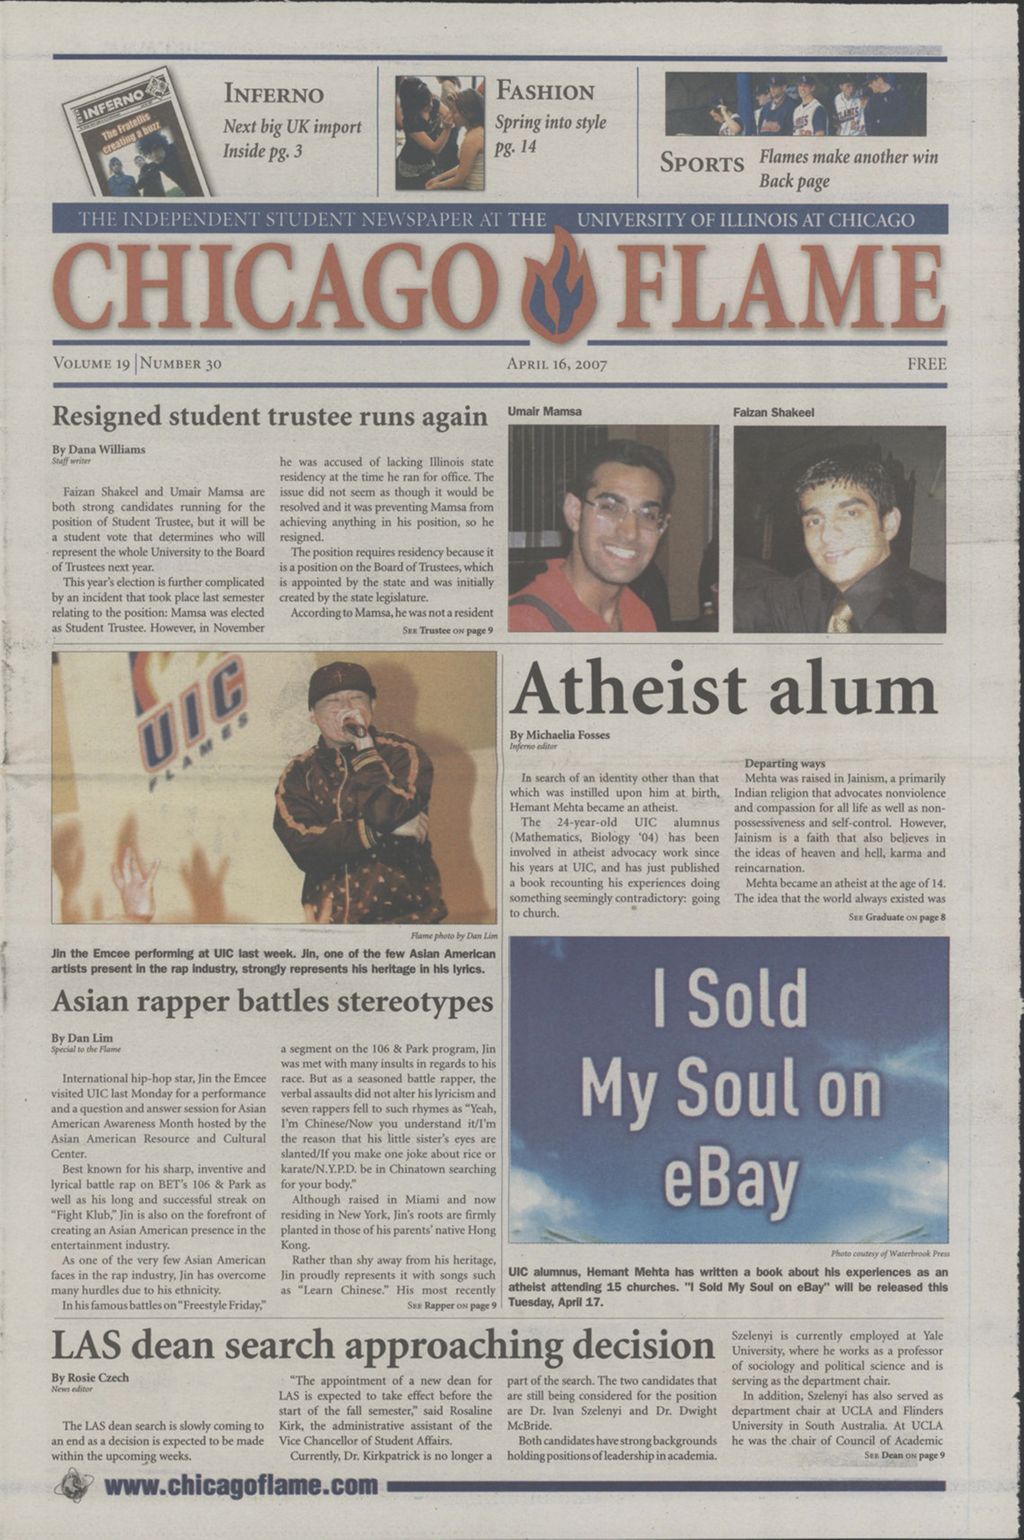 Chicago Flame (April 16, 2007)